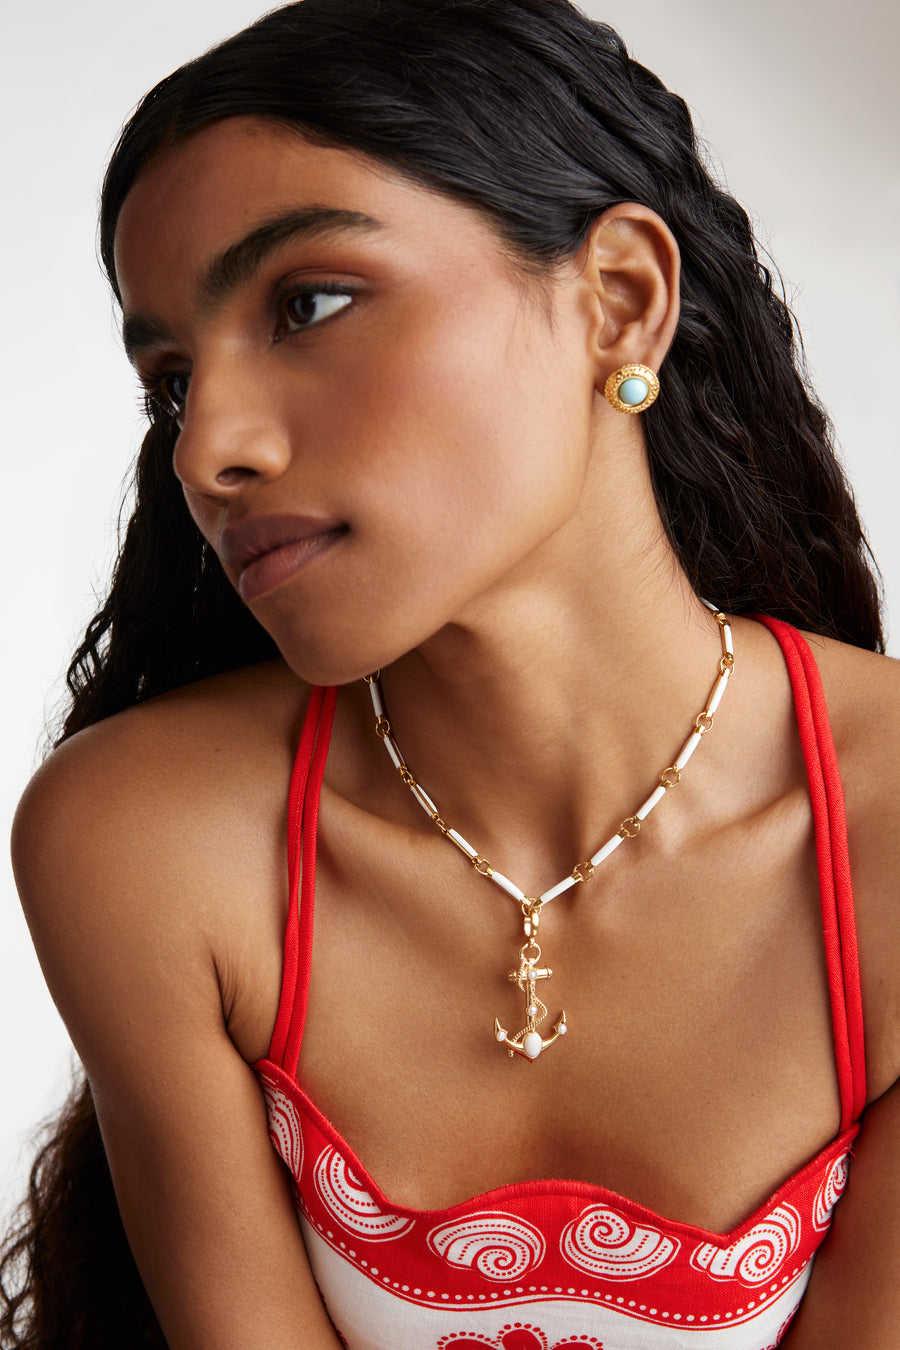 Model shot wearing the Soru Jewellery gold anchor charm with white embellishments and rope twist detail hung from a white and gold chunky charm chain. Model also wearing the round turquoise stud earrings while leaning forward